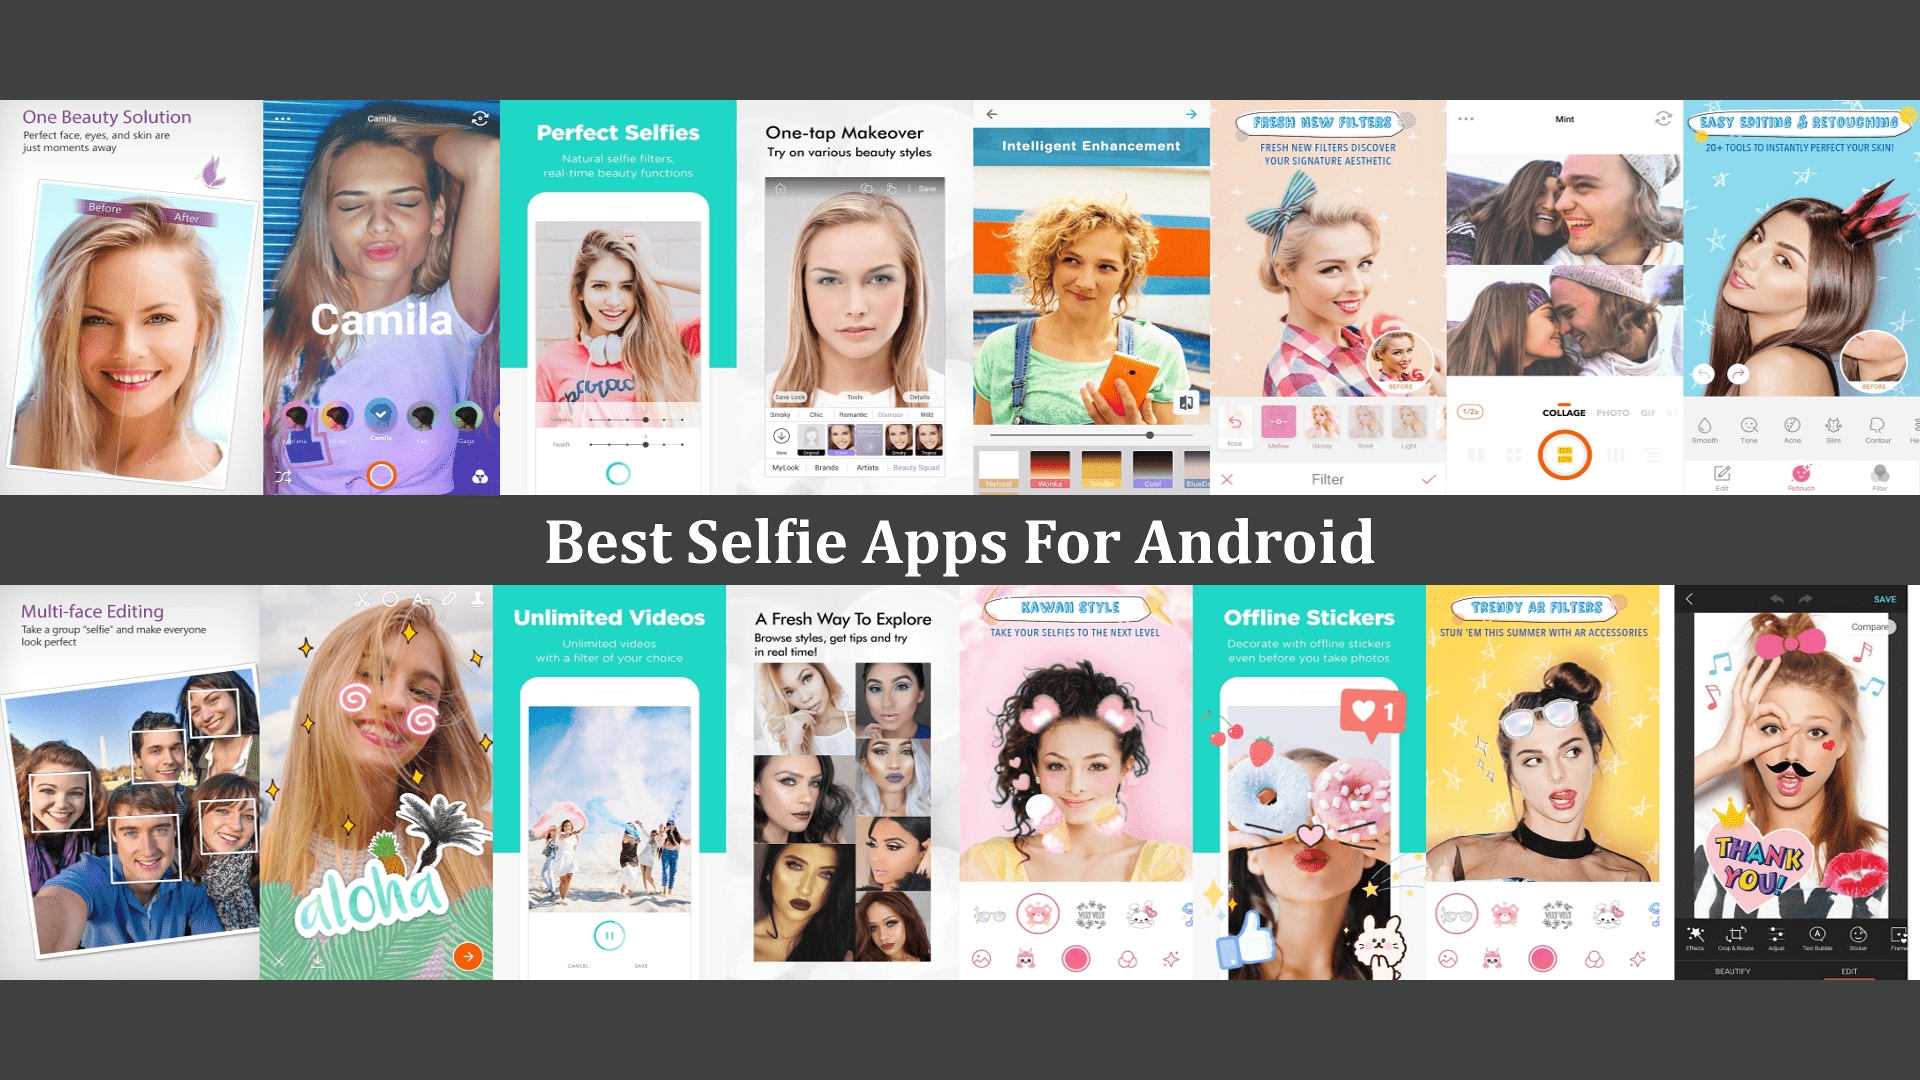 Best Selfie Apps For Android